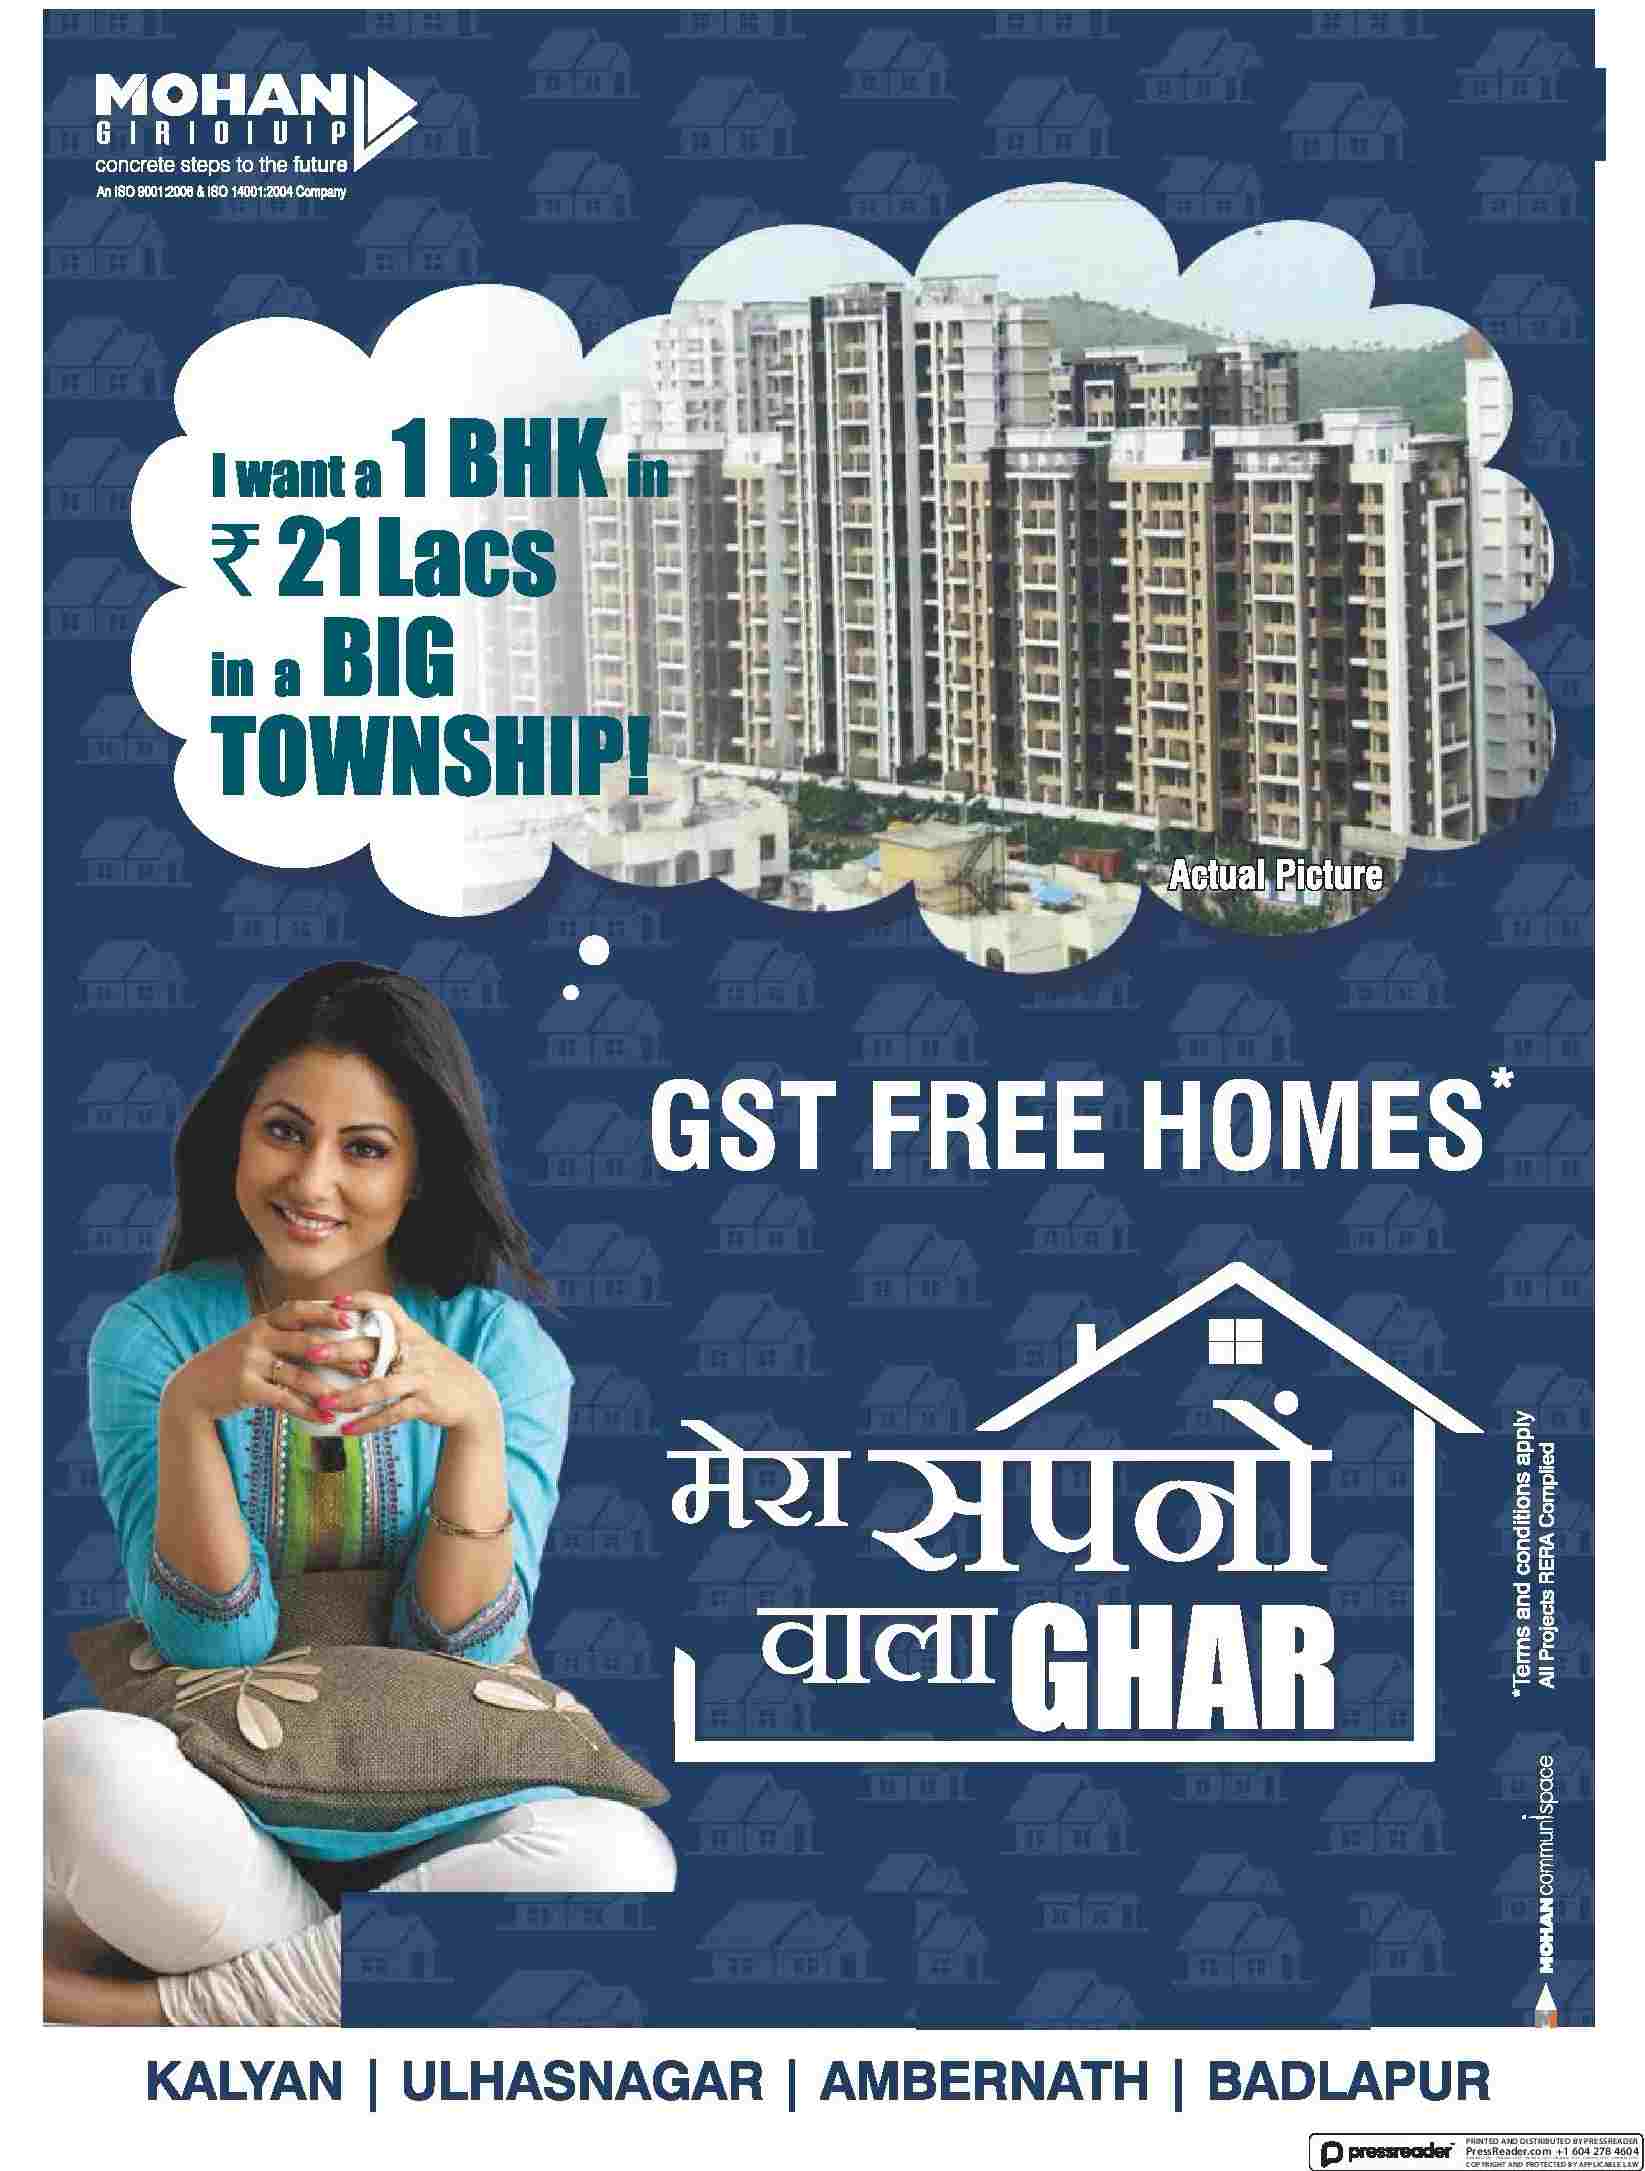 Invest in Mohan properties in Mumbai & live in GST free homes Update